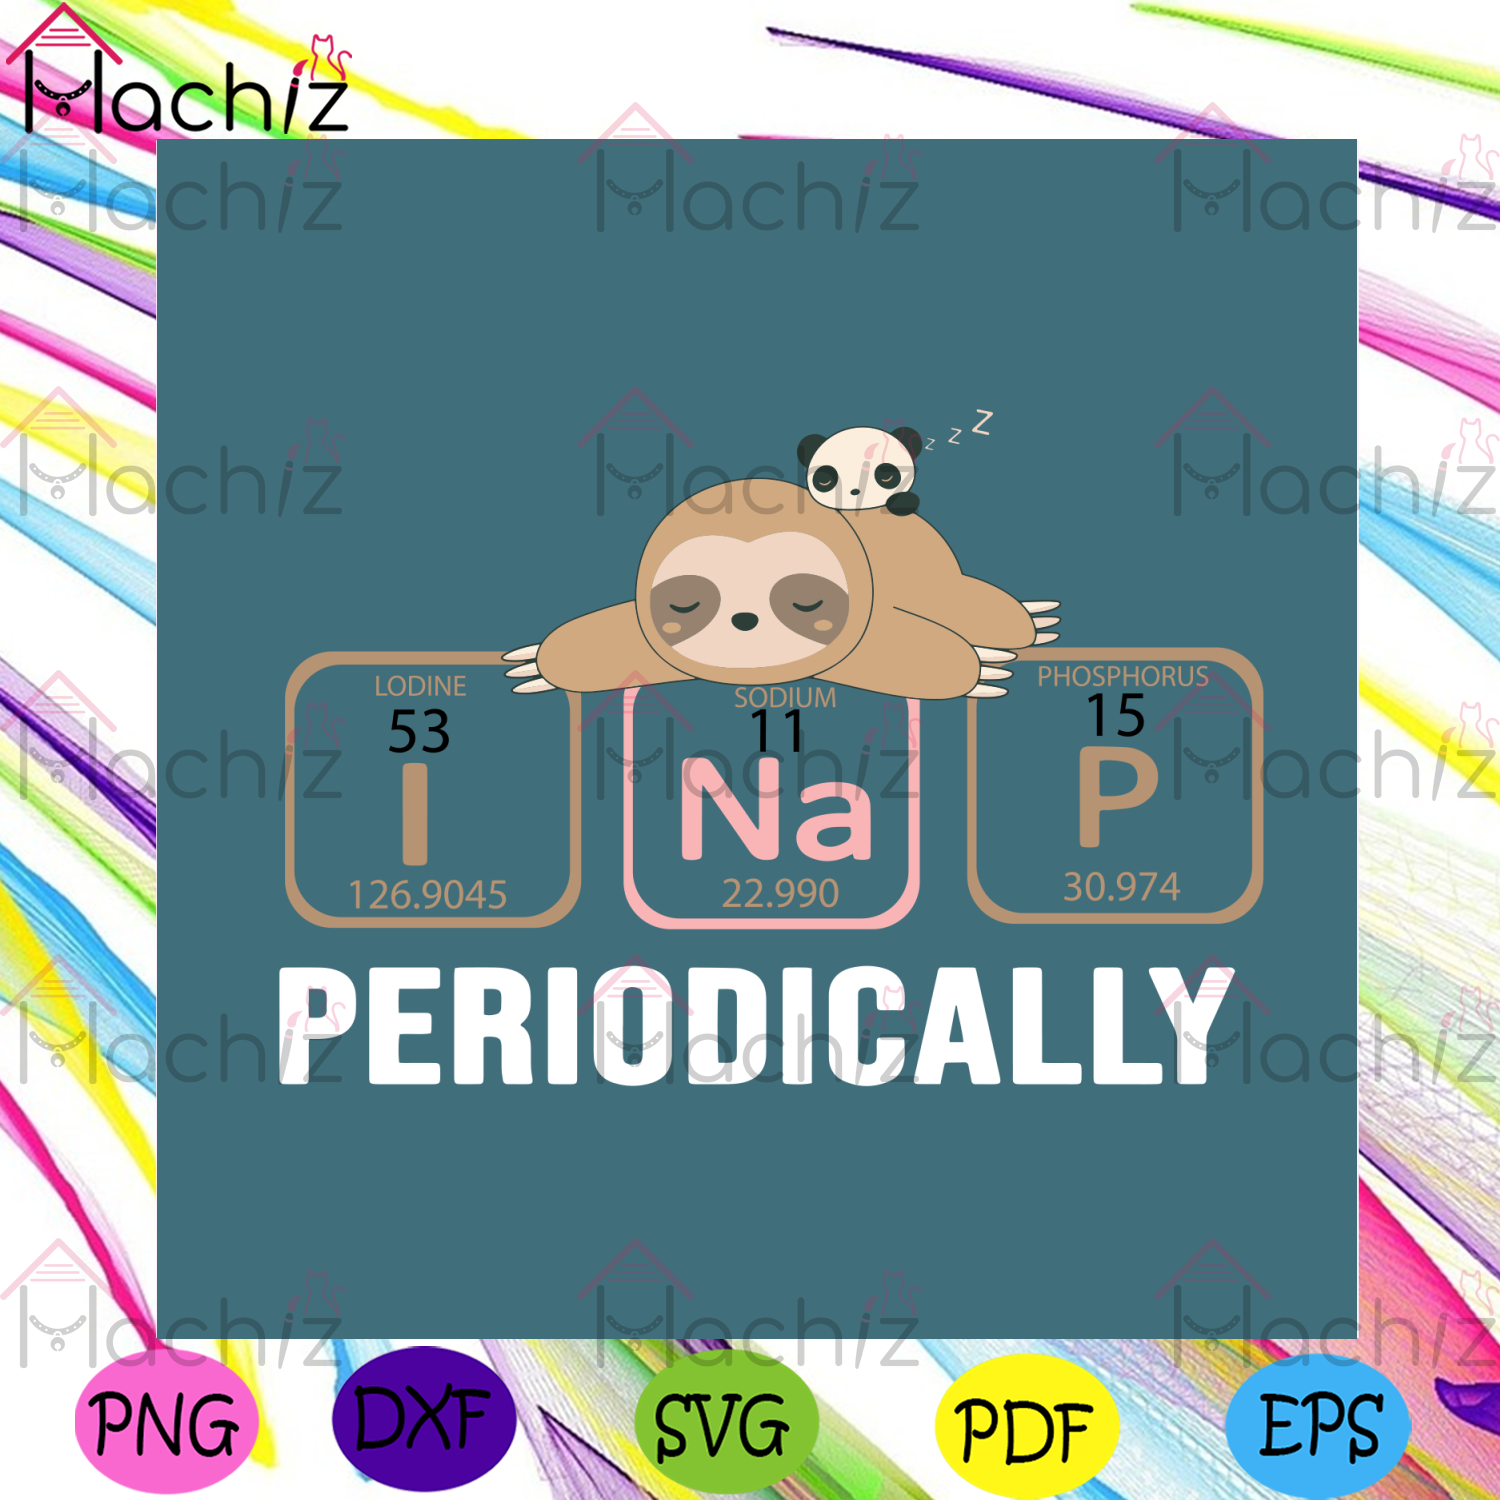 Download Periodically Sloth Svg Trending Svg Sloth Svg Chemic Svg Chemistry Hachizstore